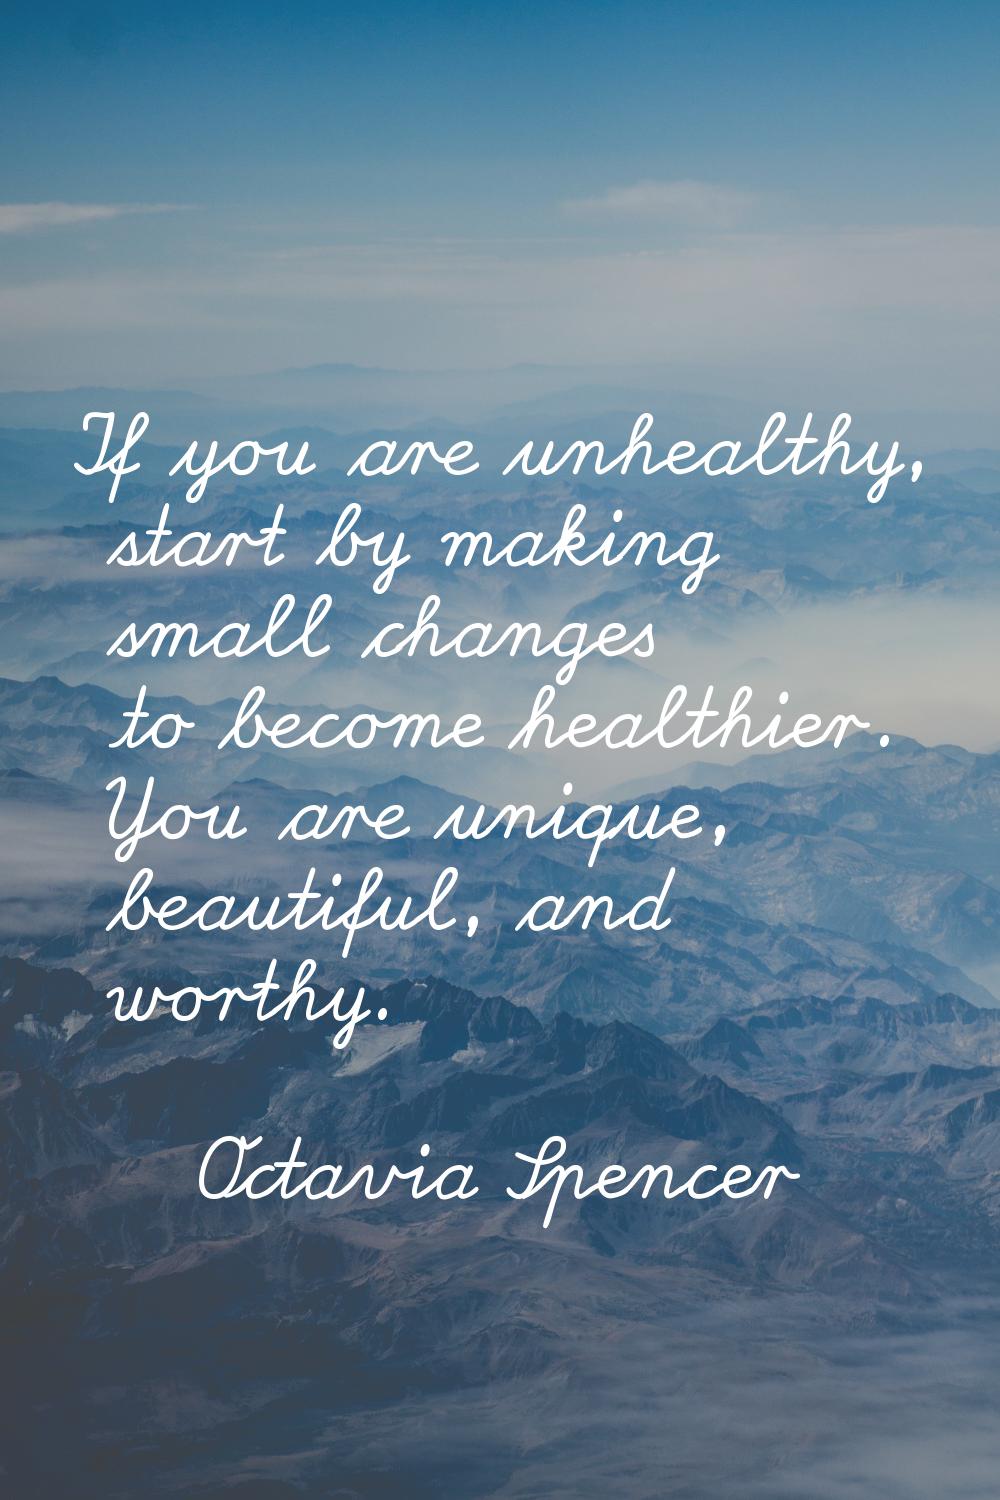 If you are unhealthy, start by making small changes to become healthier. You are unique, beautiful,